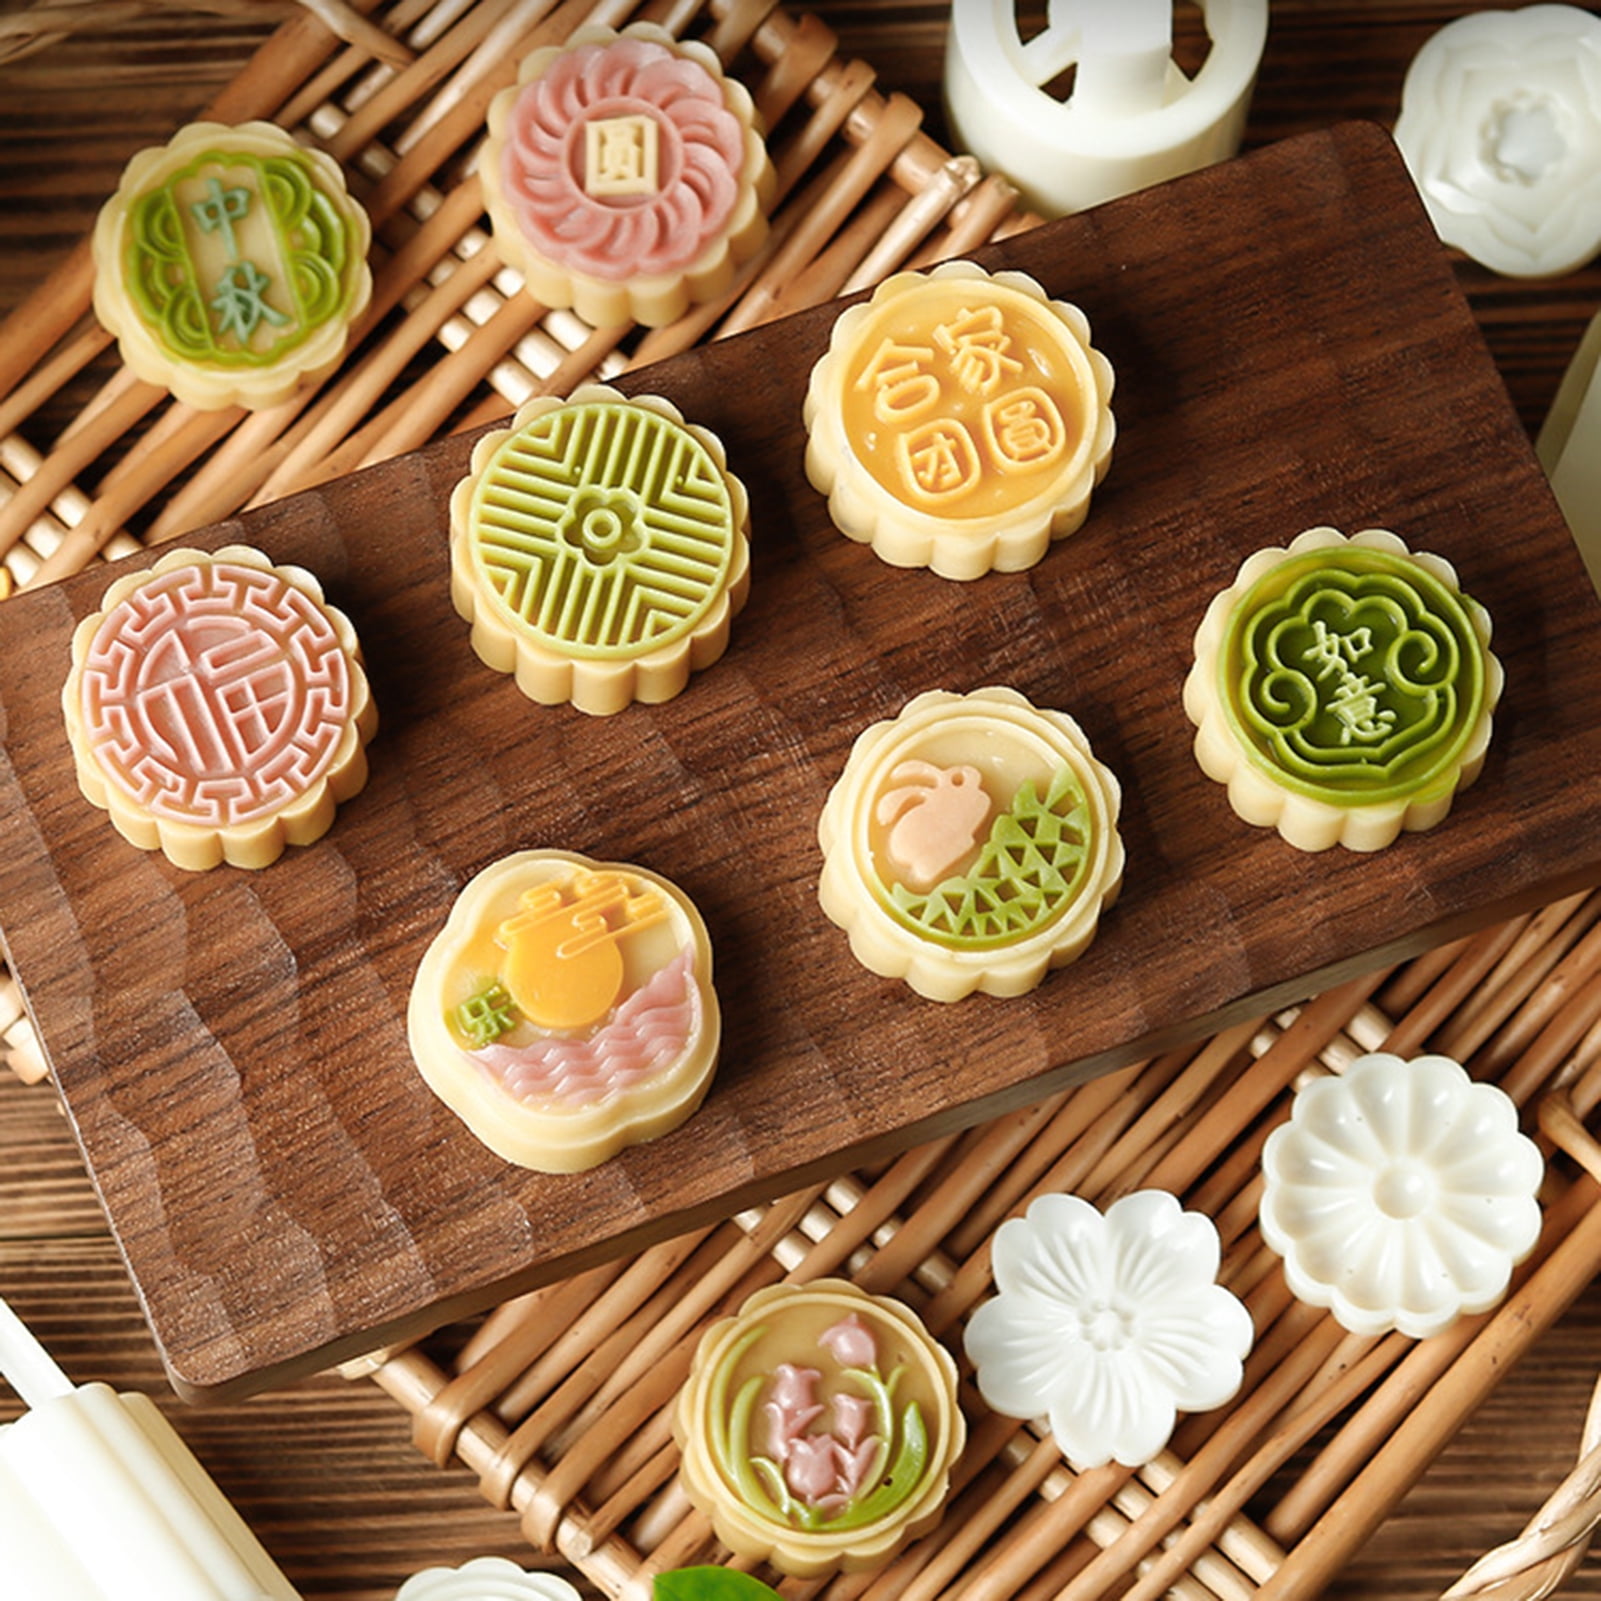 Lovair 6 PCS Moon Cake Mold, Mid Autumn Festival DIY Hand Press Cookie  Stamps Pastry Tool Moon Cake Maker, Decorative Mooncake Molds - 1 Mold 6